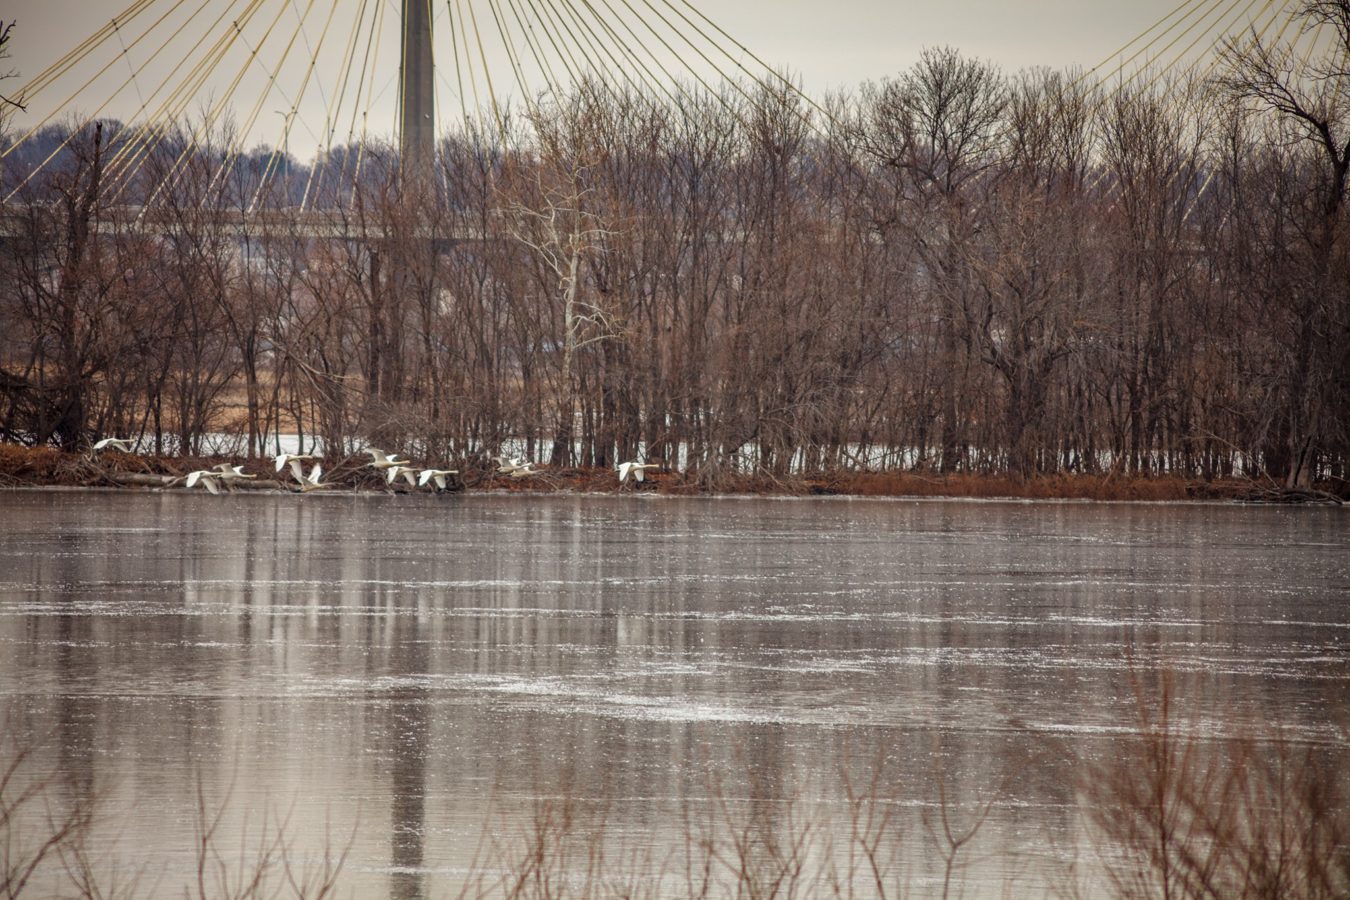 Trumpeter Swans, White Pelicans, and ducks on the Mississippi River